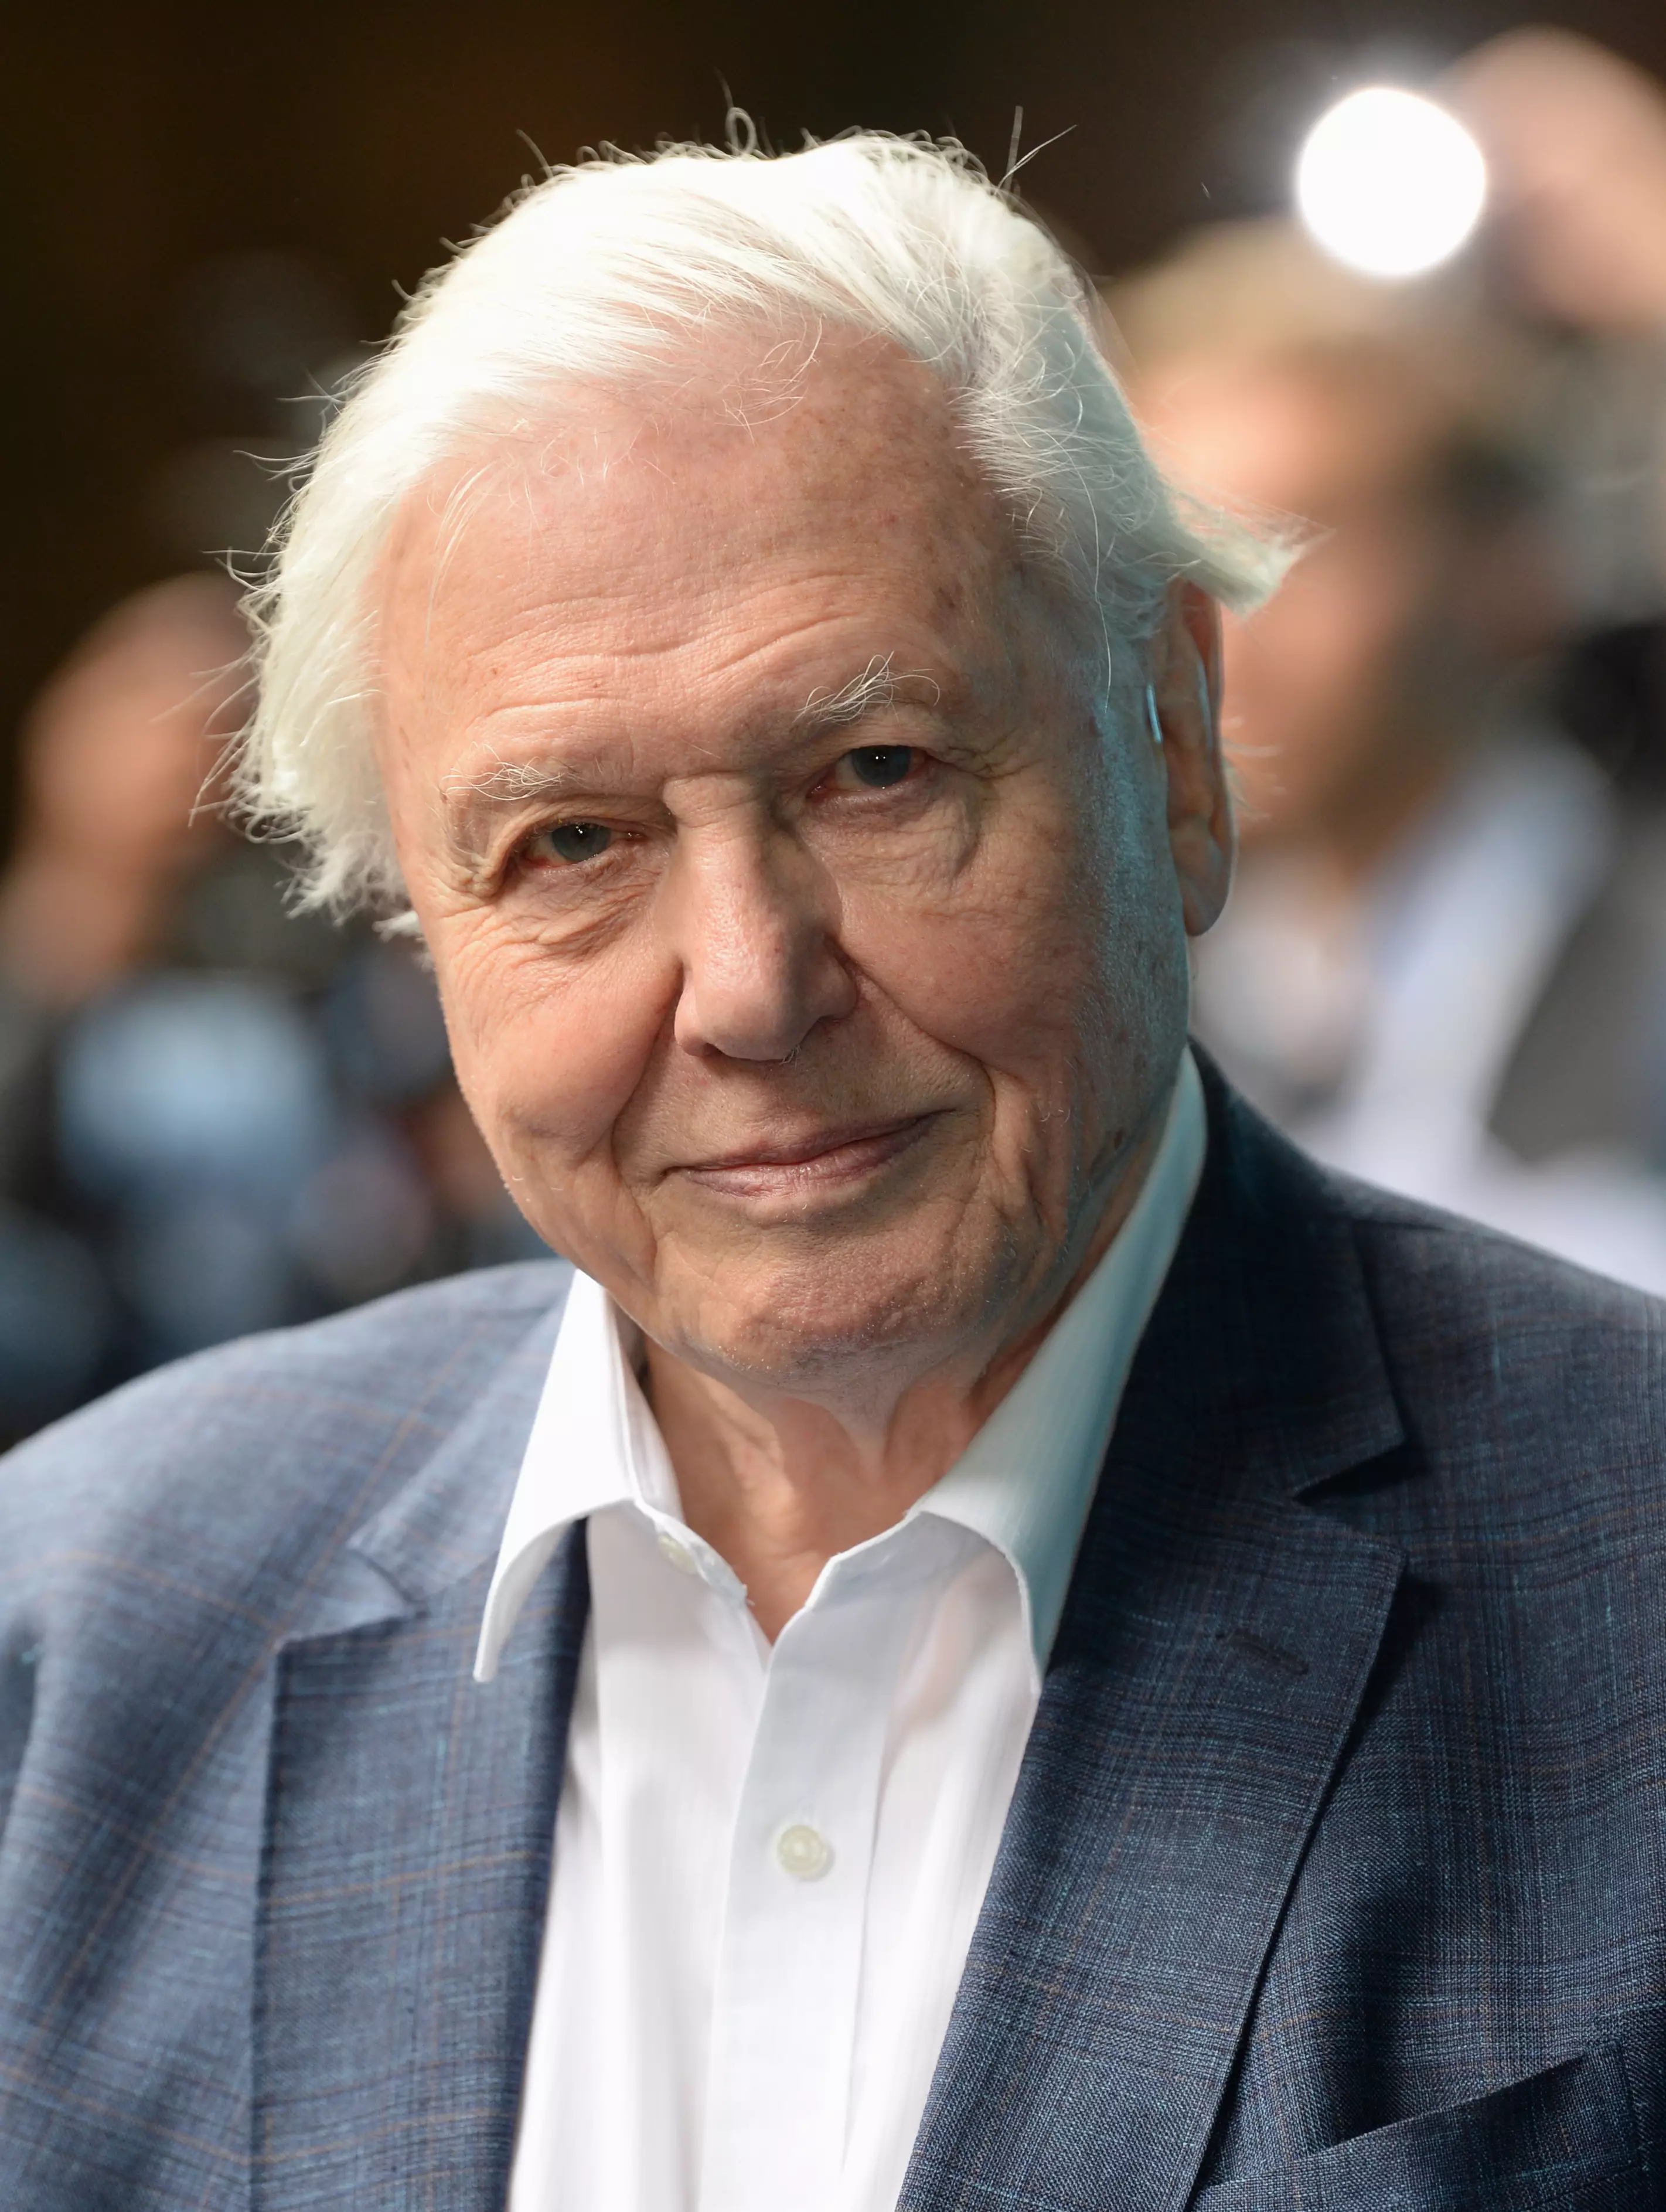 Sir David Attenborough's latest documentary has left many vowing to change their behaviour.